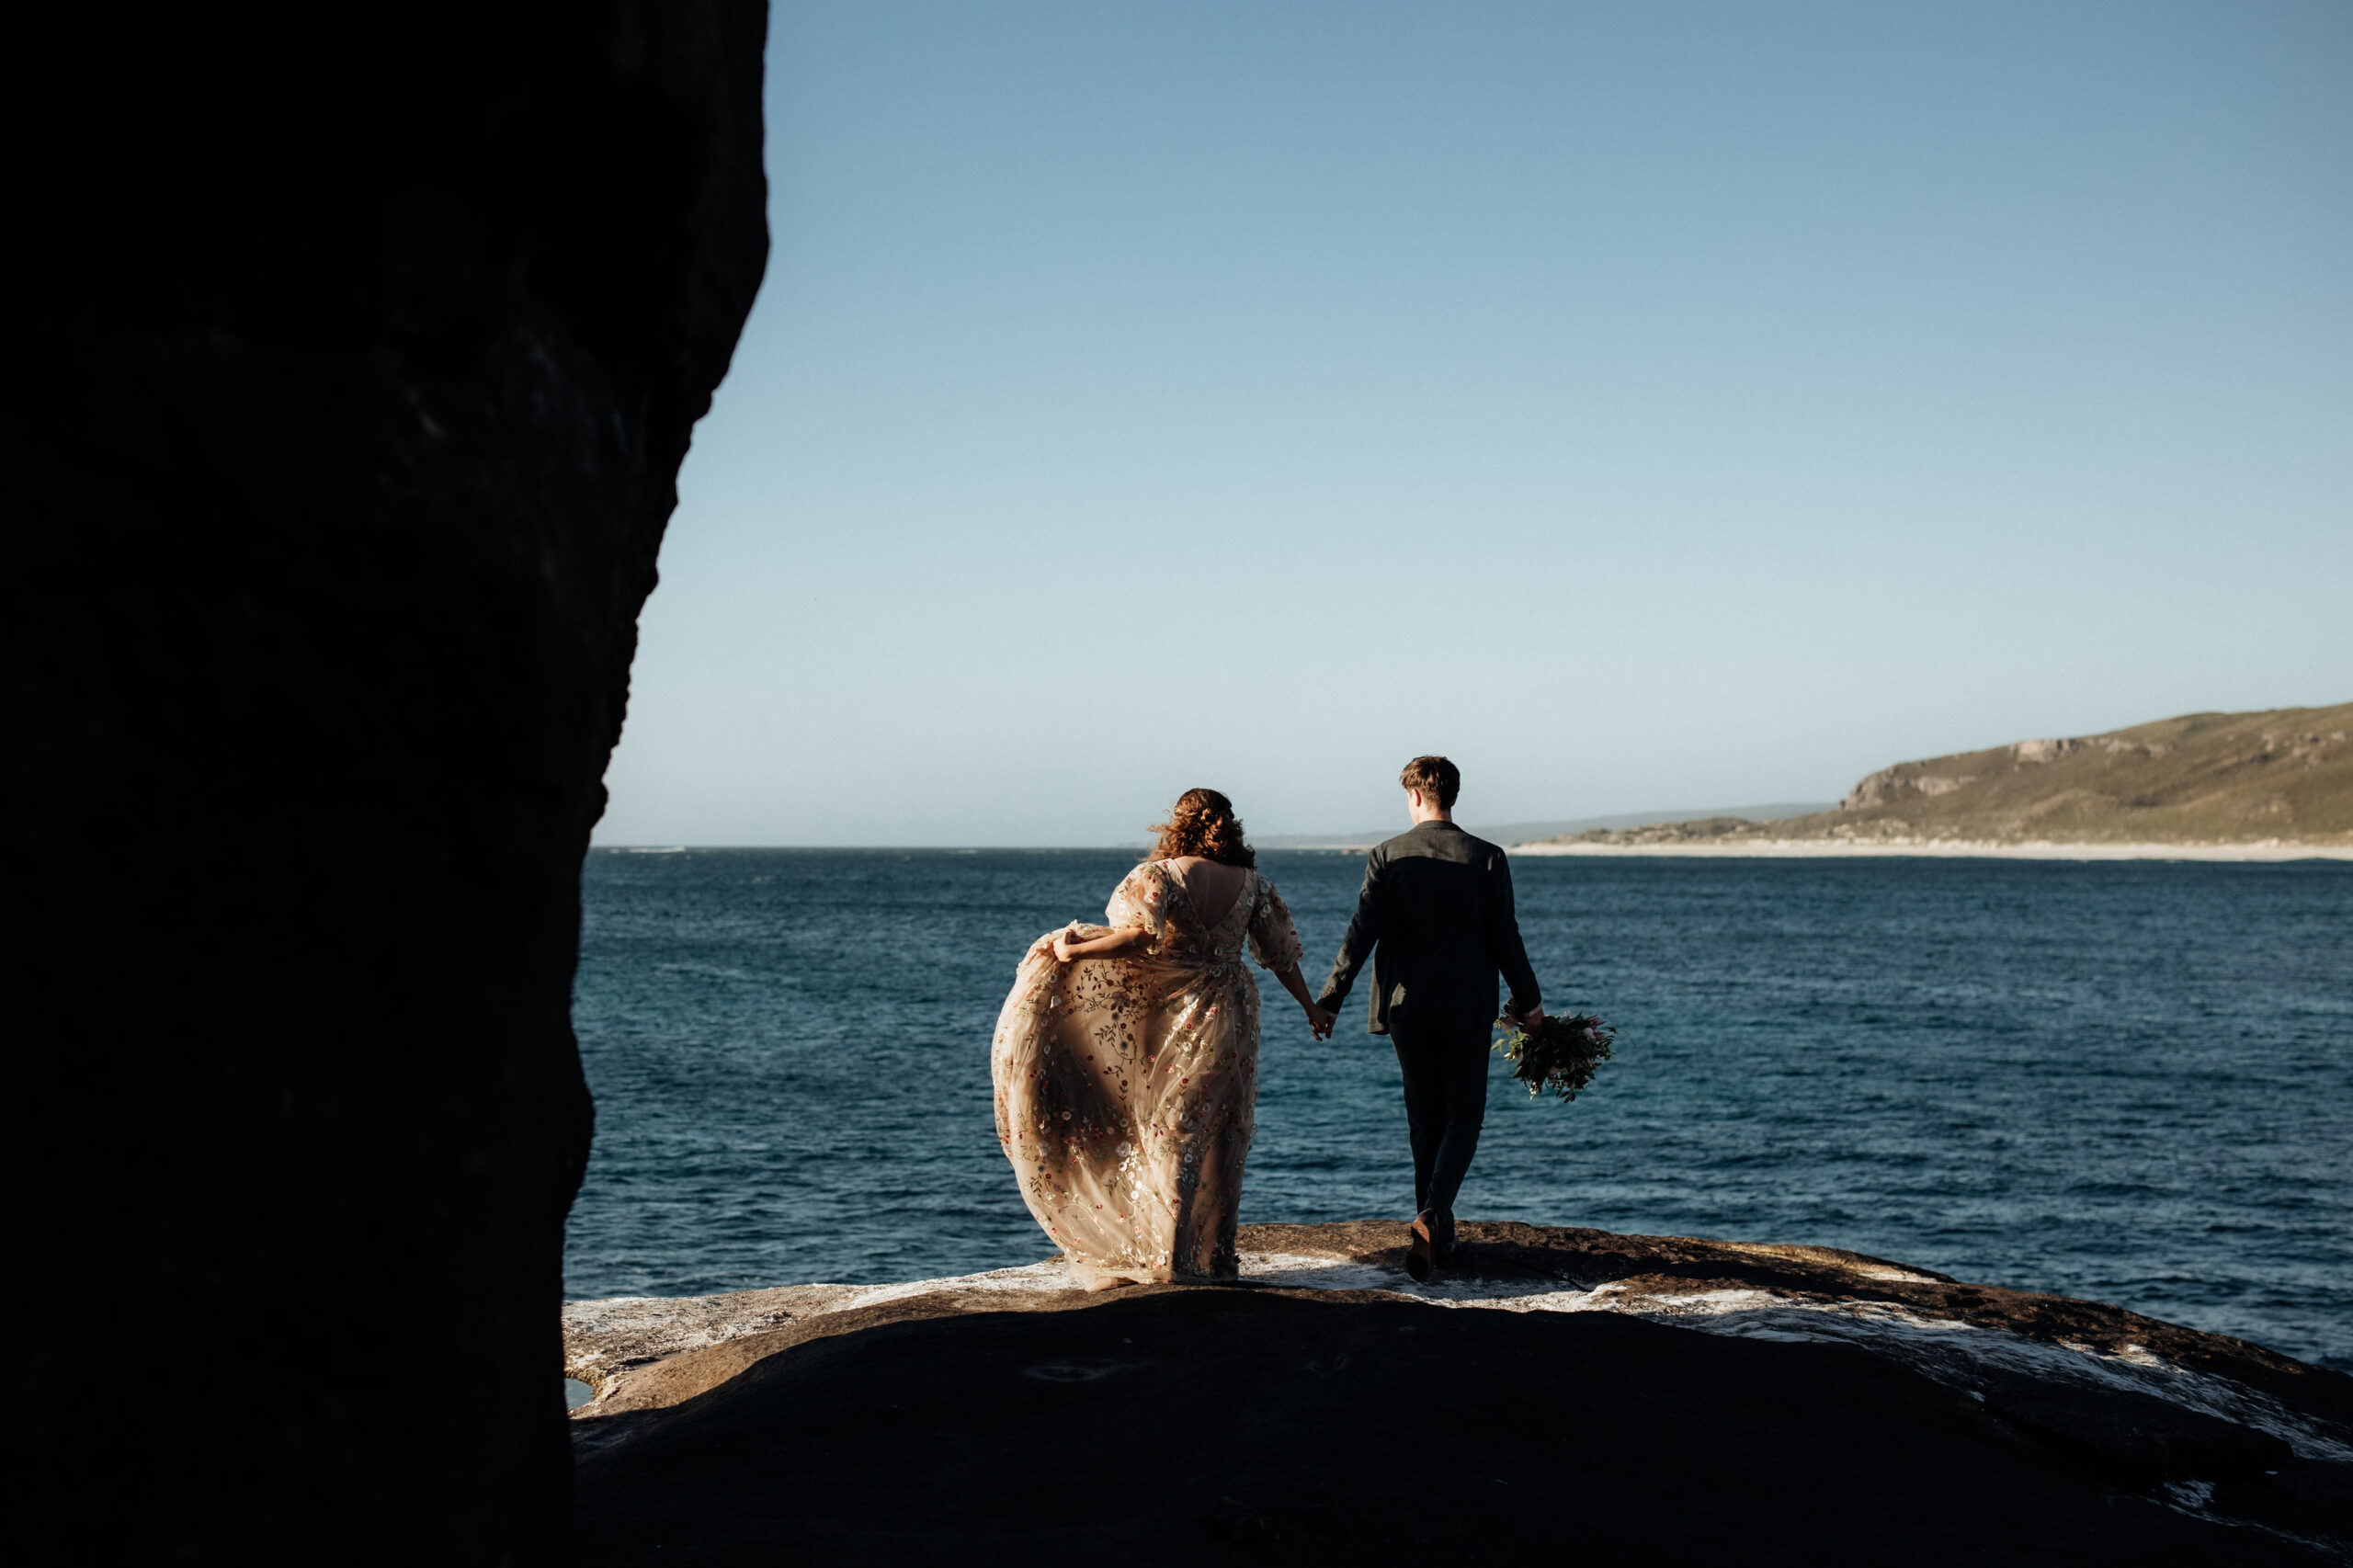 elope in the south west of Western Australia's rugged coastline